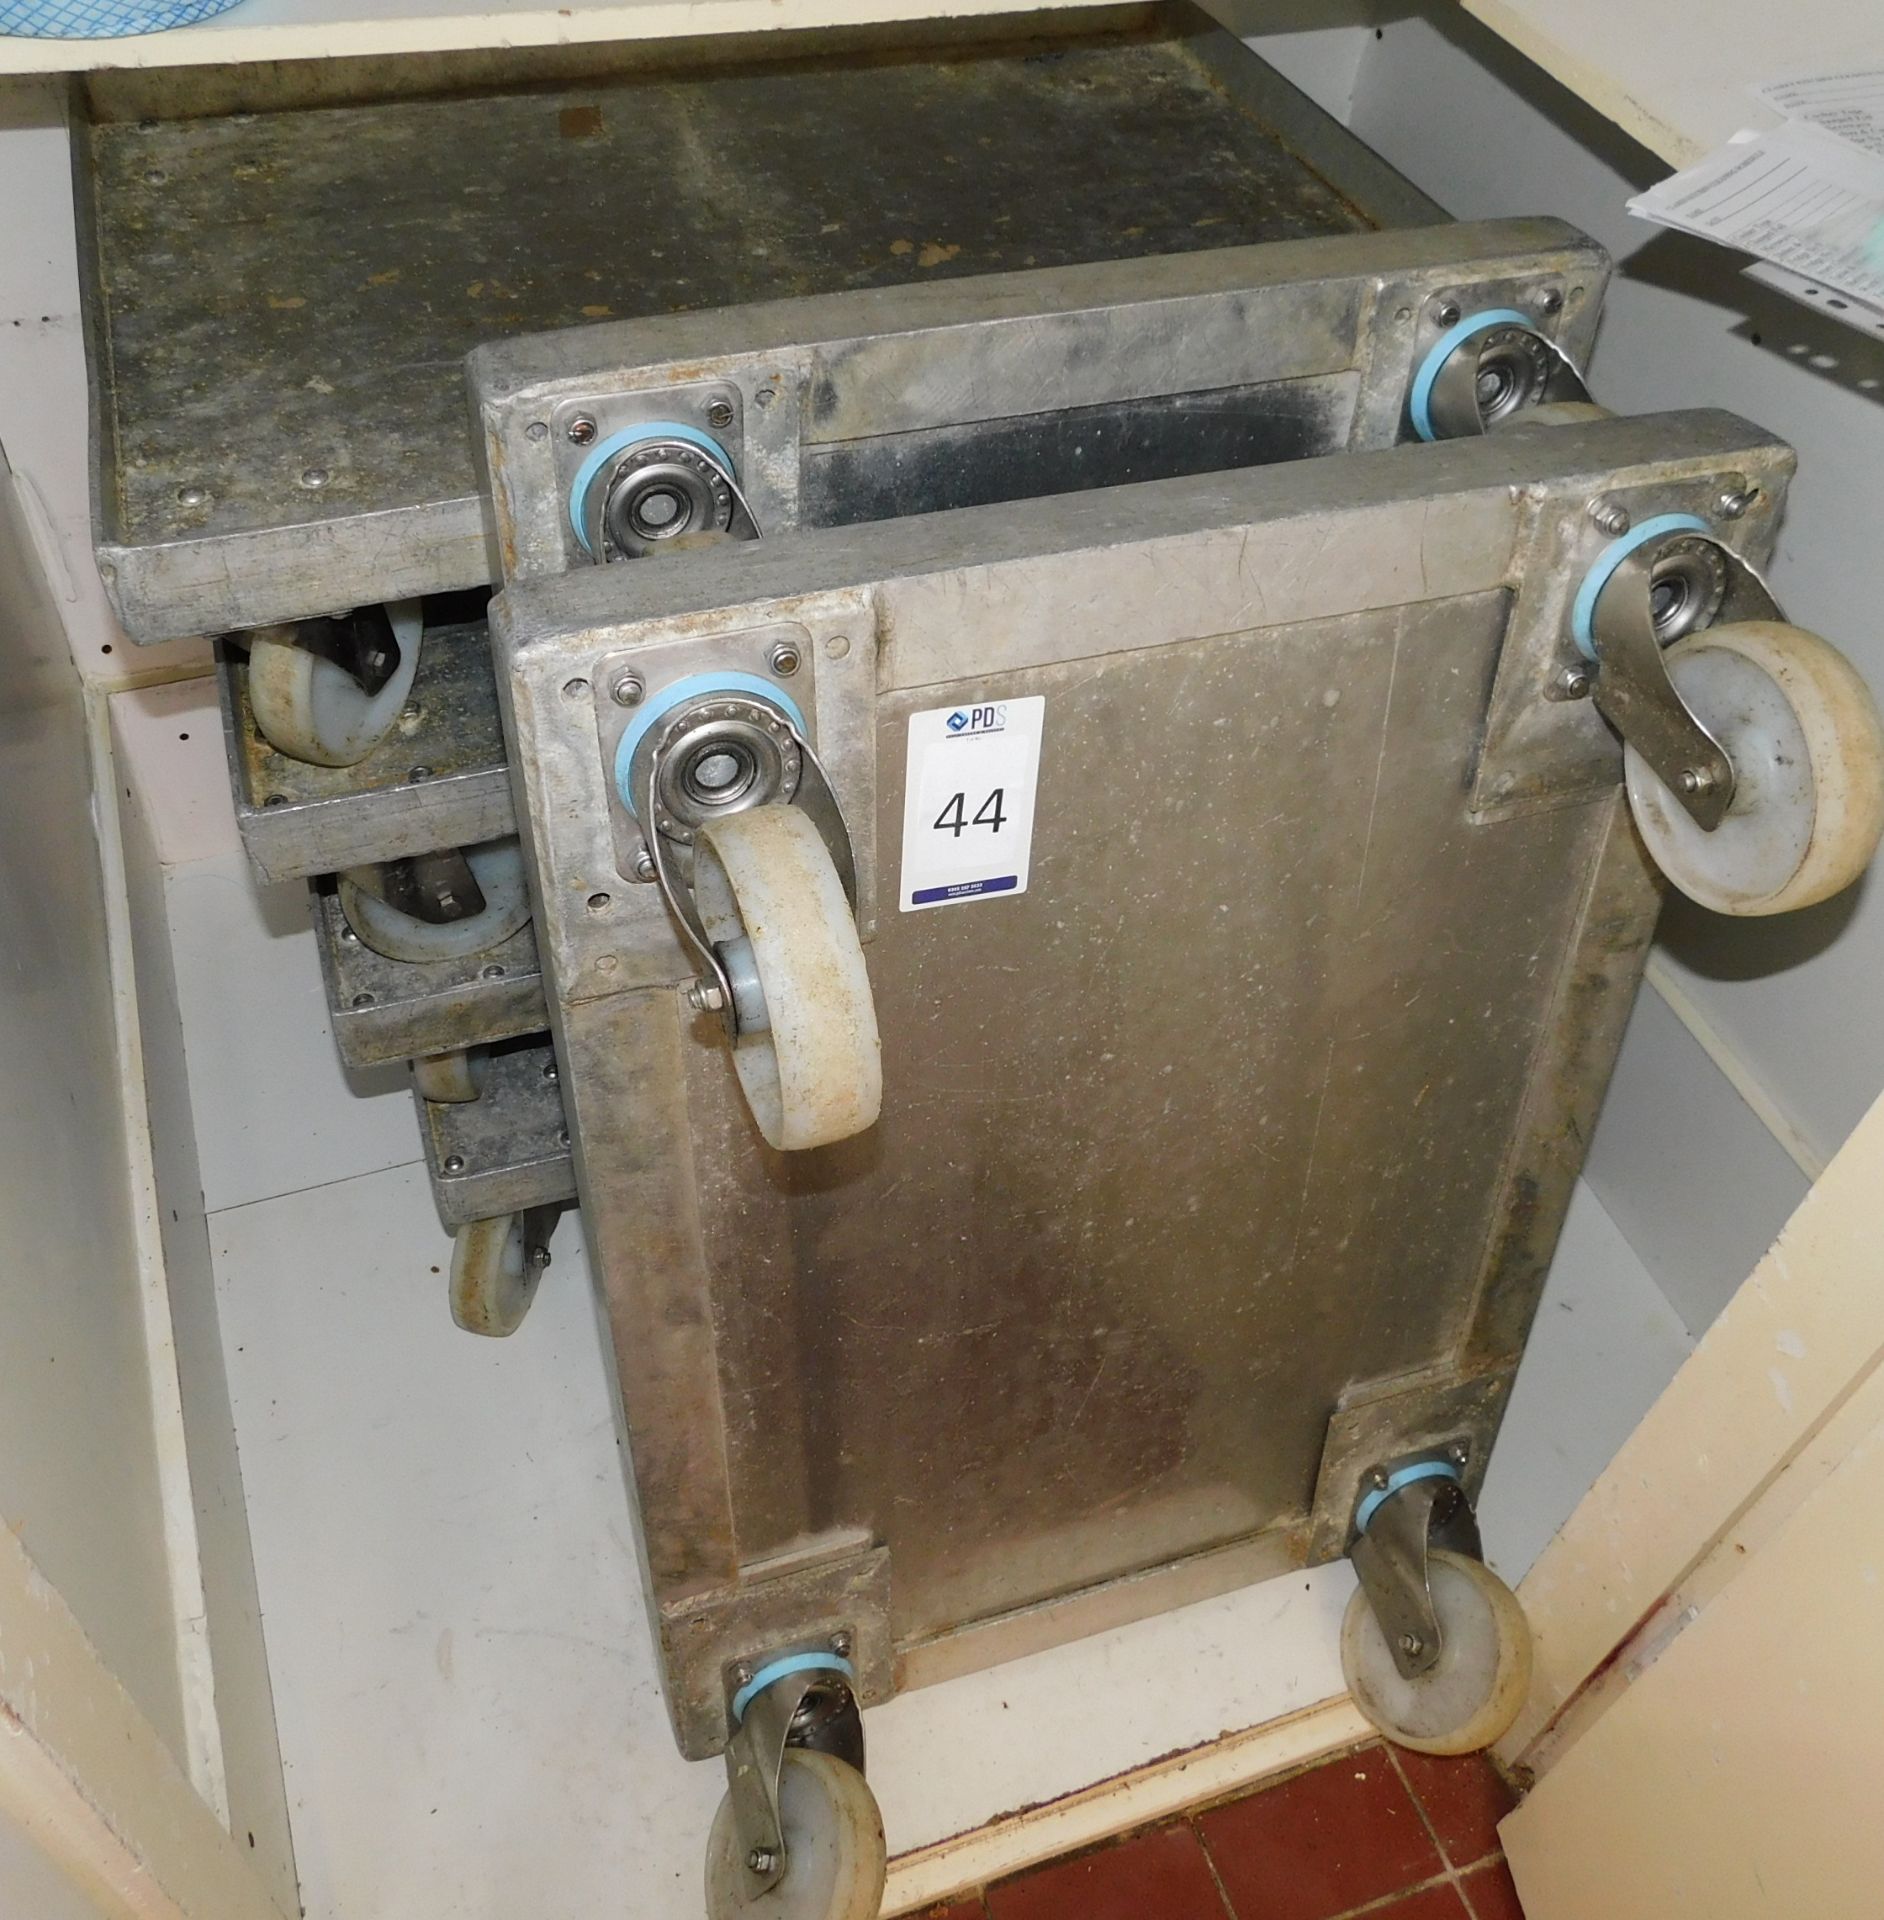 6 Aluminium Tray Trollies (Location: Skelmersdale. Please Refer to General Notes)